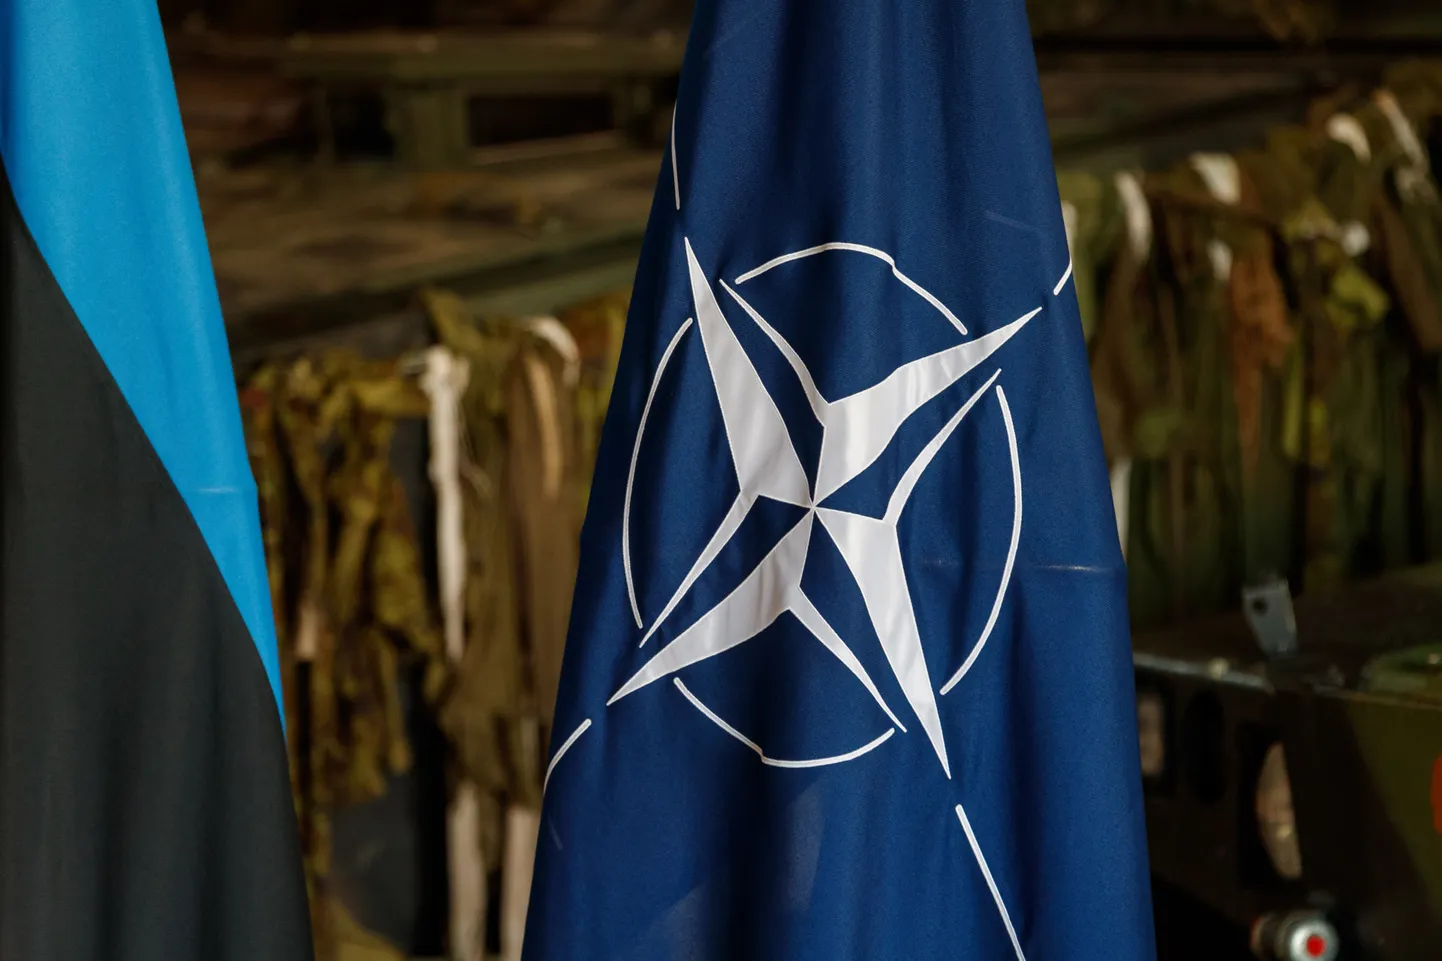 Estonia to get over EUR 40 mln from NATO joint funding for infrastructure development.